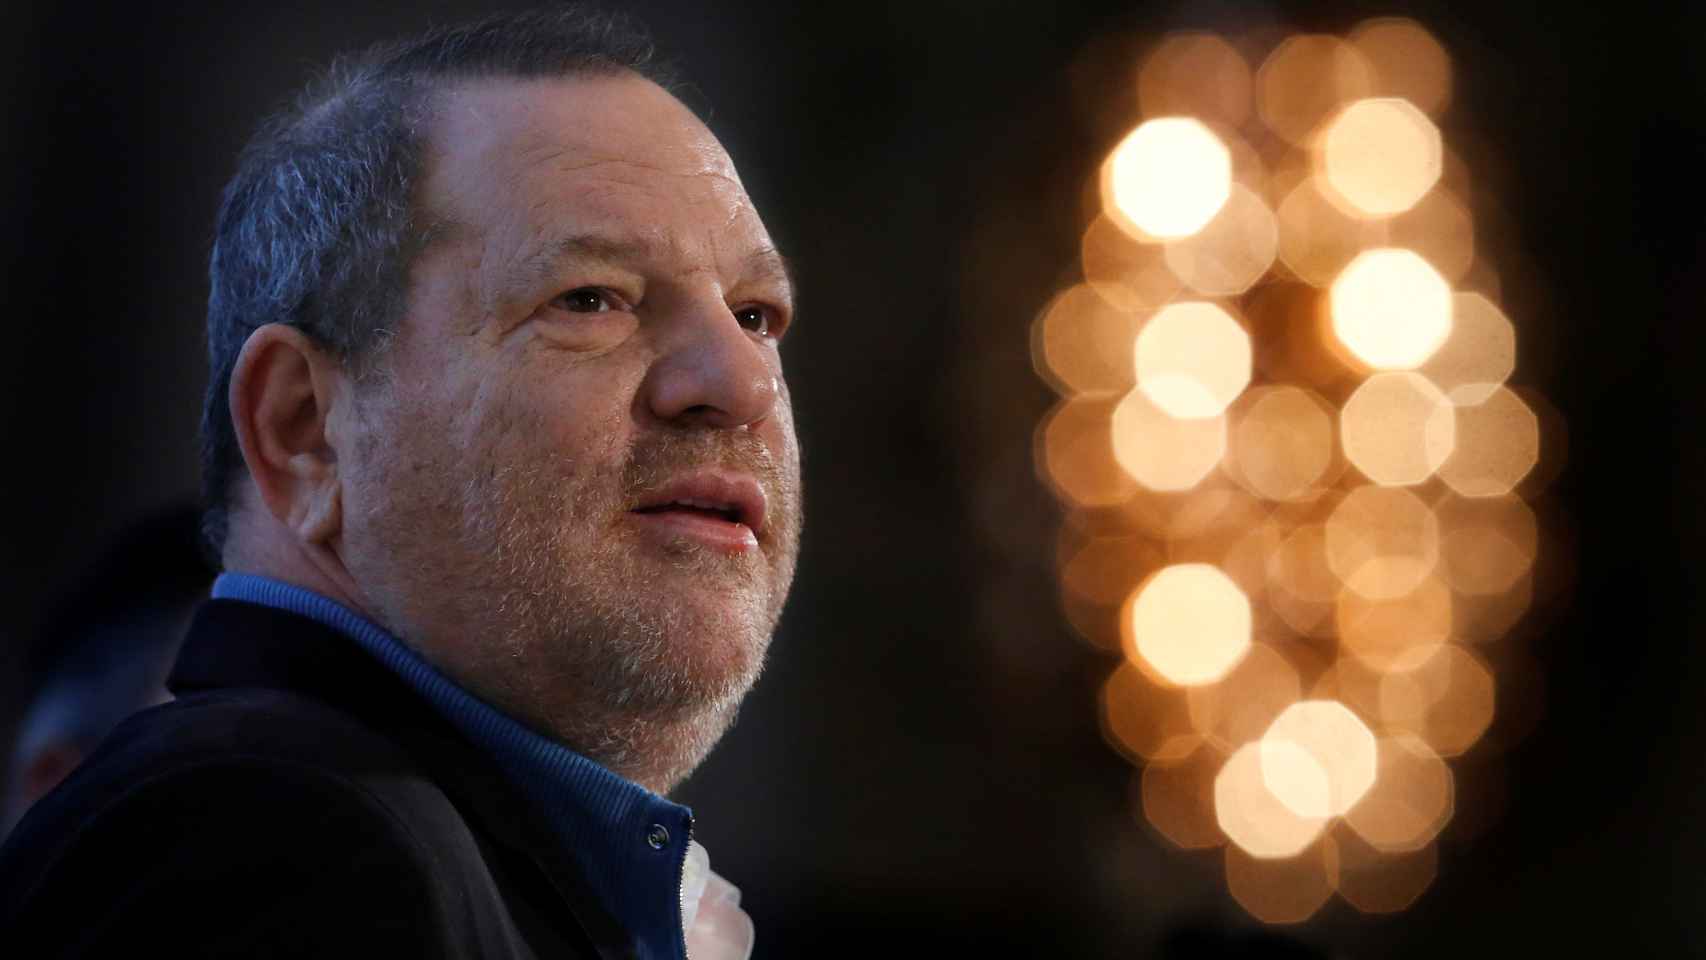 FILE PHOTO: Harvey Weinstein speaks at the UBS 40th Annual Global Media and Communications Conference in New York